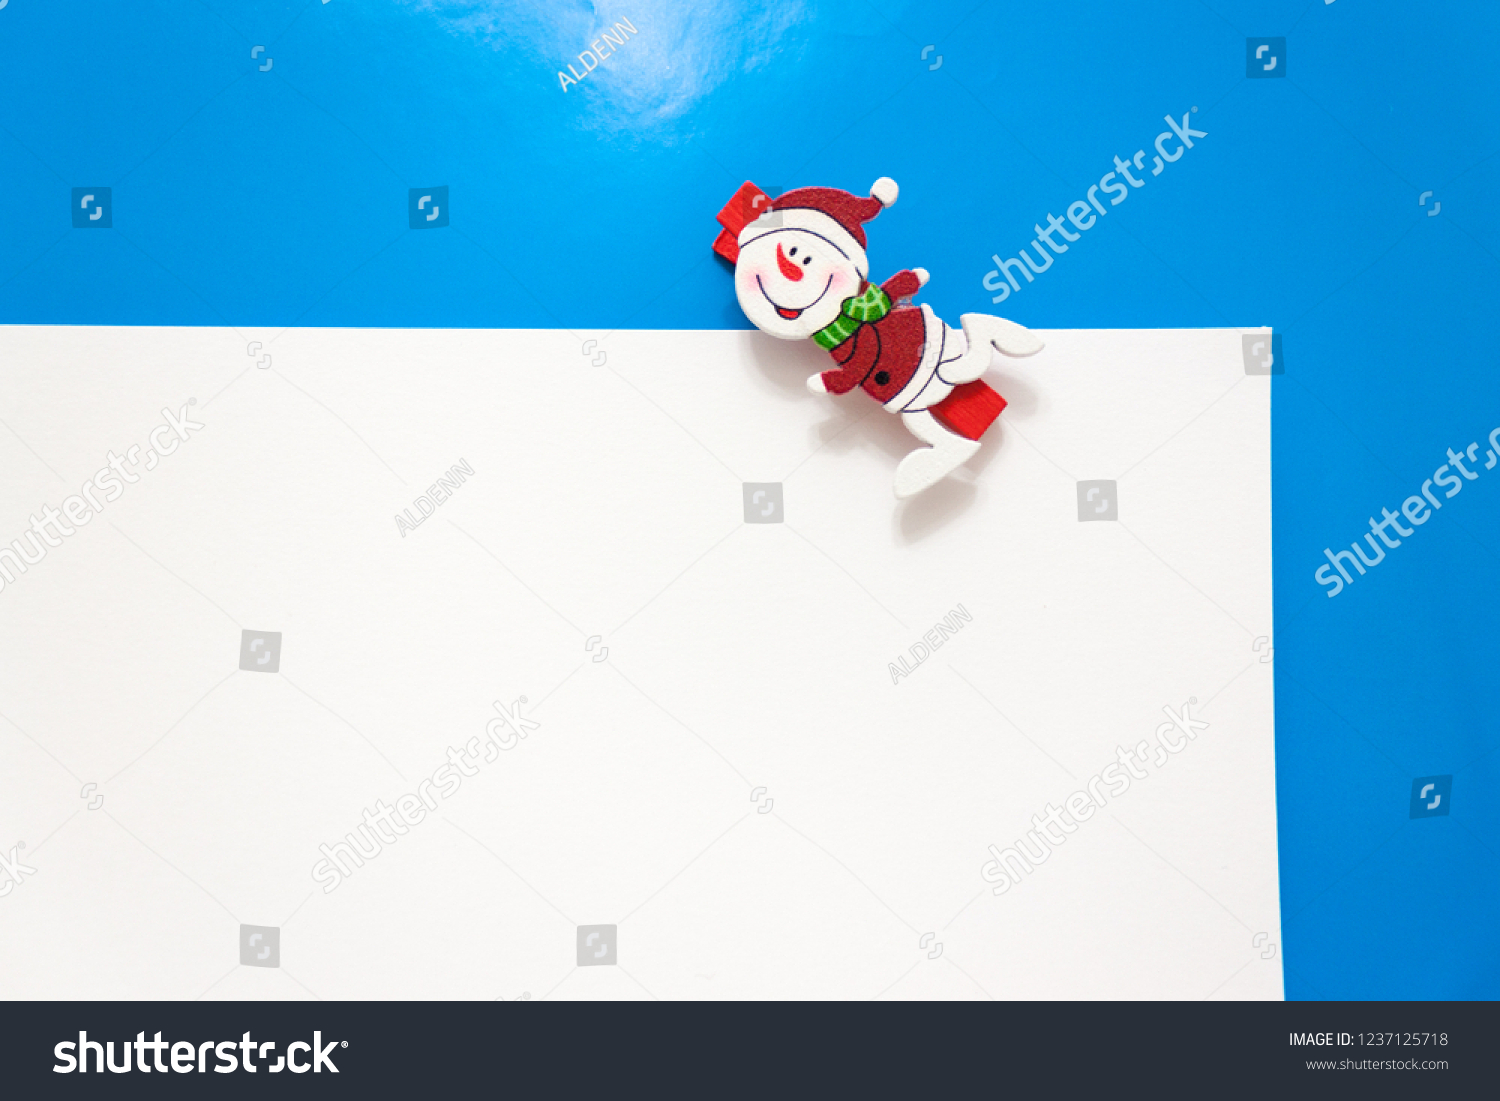 Set design template New Year's discount banner. Christmas poster with a cute snowman for sale. Happy holiday offer with snowman wearing a scarf and with cartoon gift. Xmas advertising for sale.  #1237125718